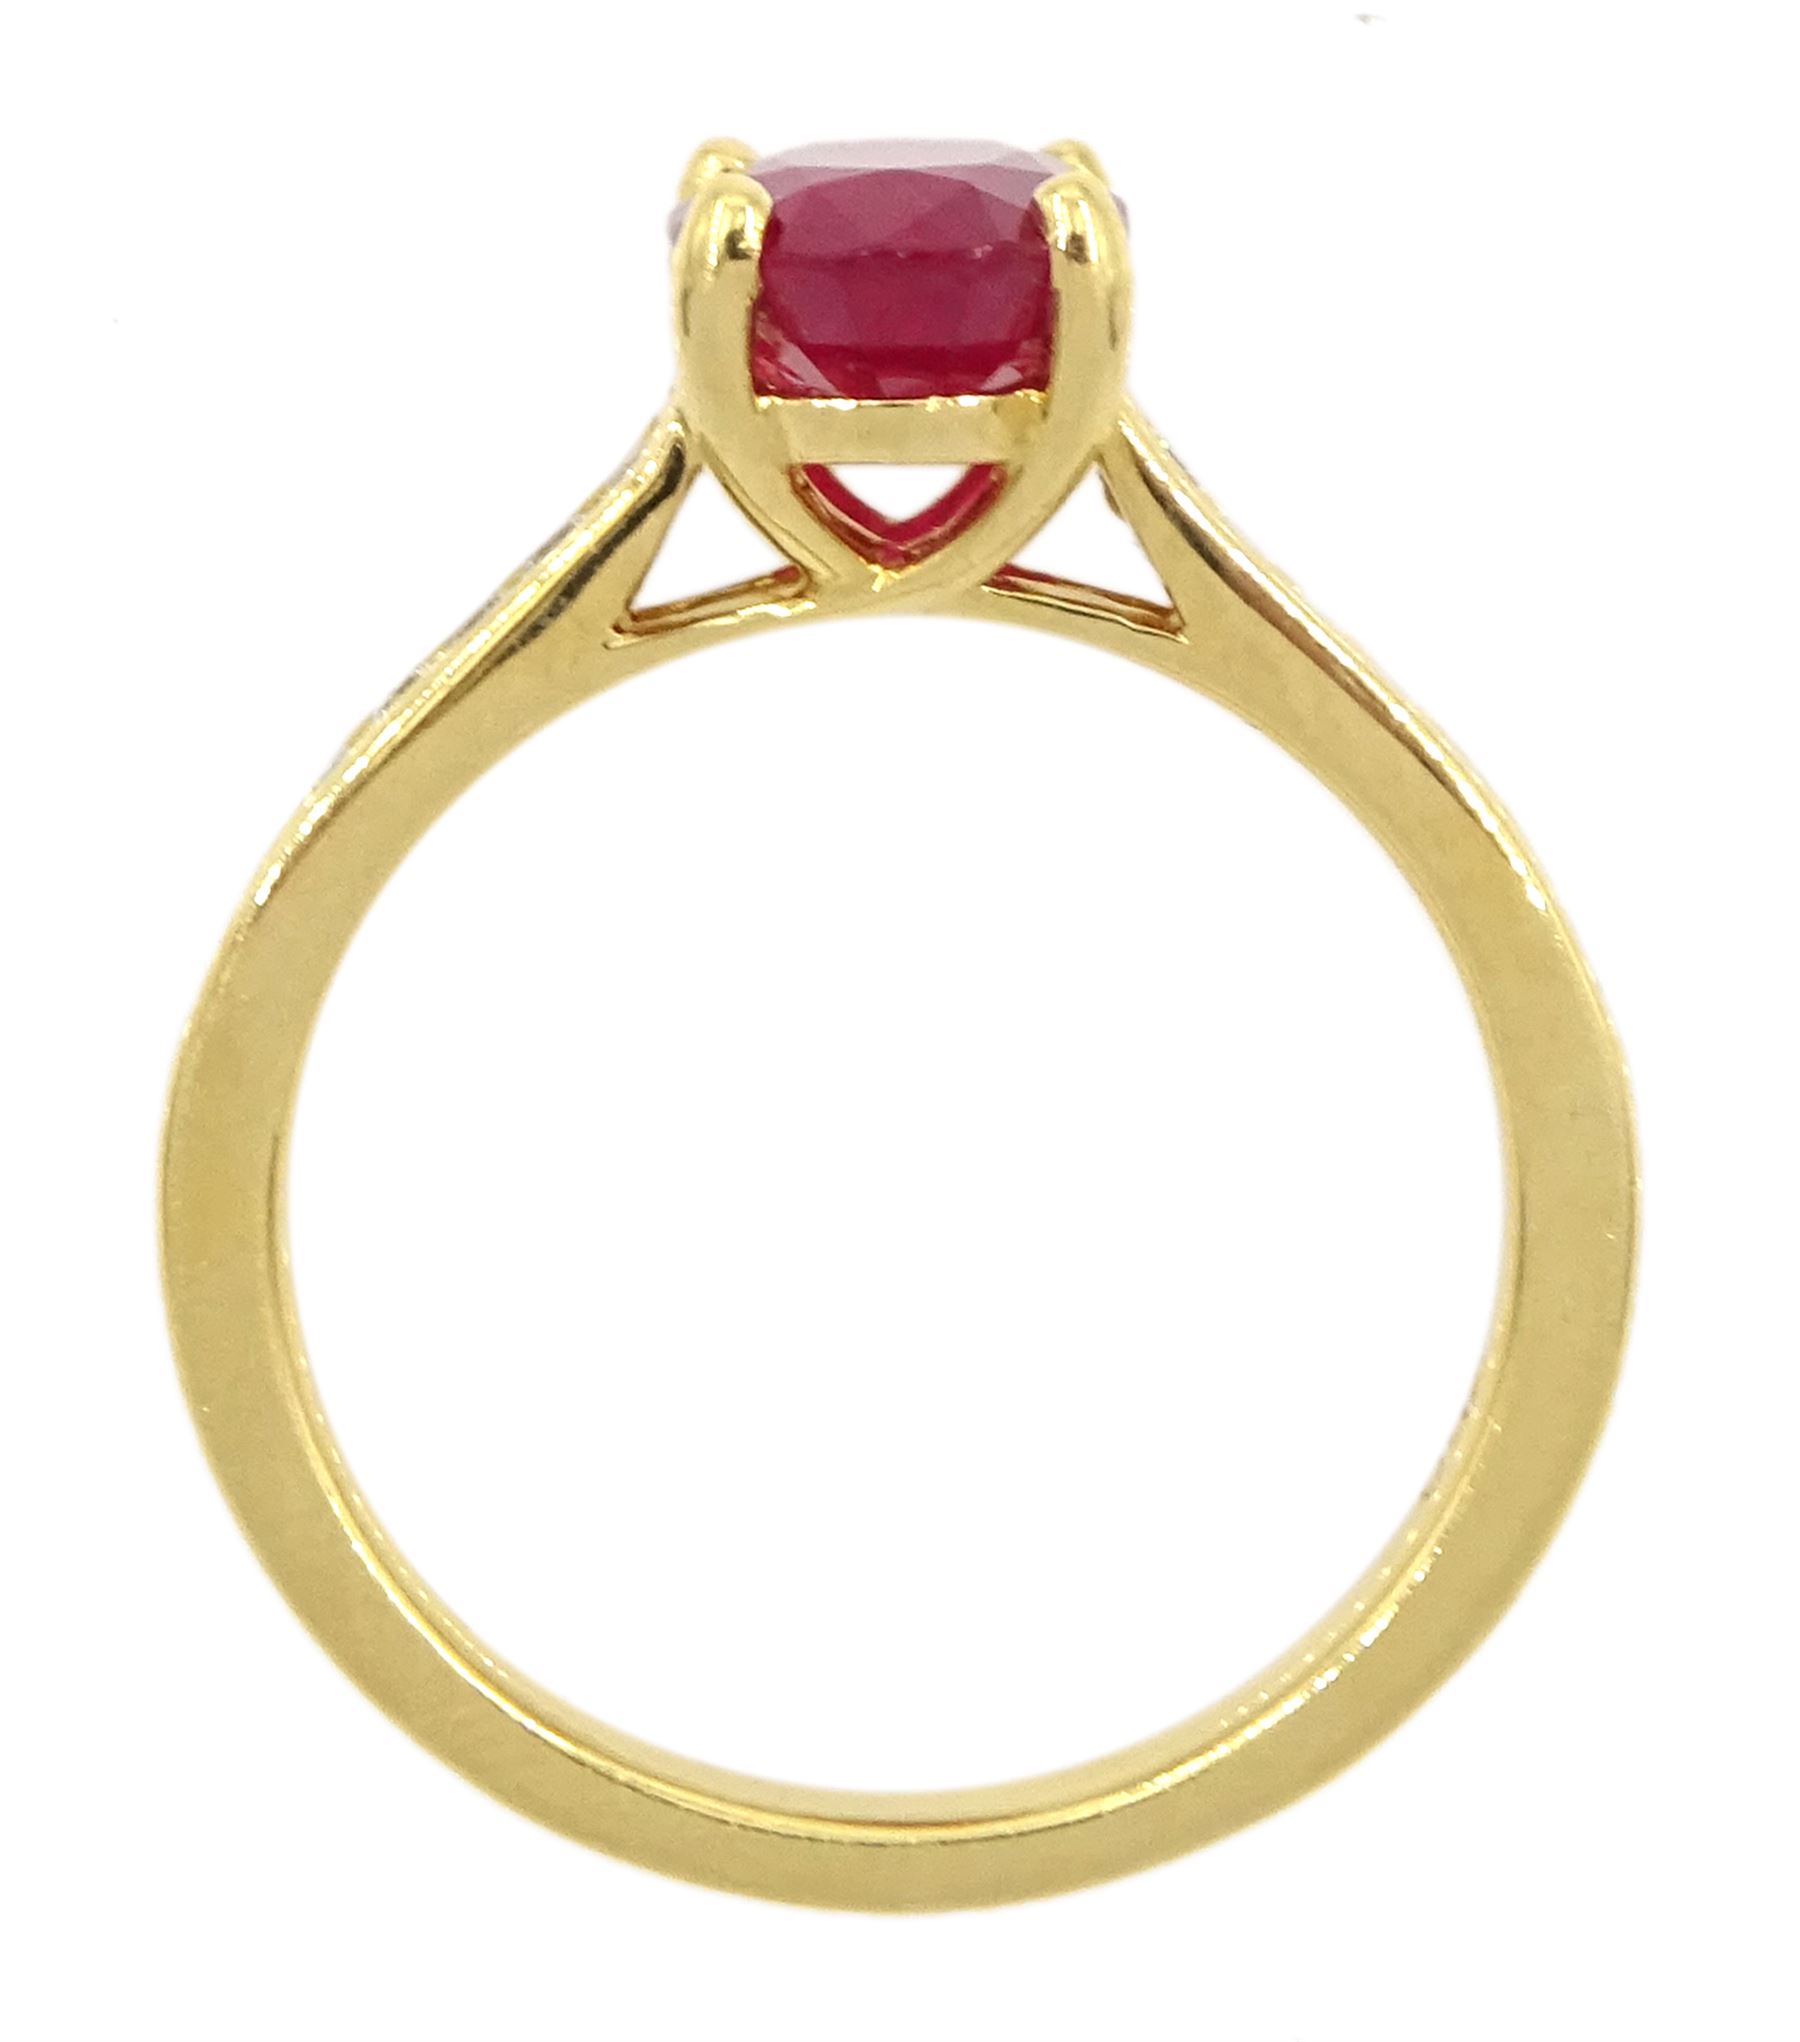 18ct gold oval ruby ring - Image 7 of 7